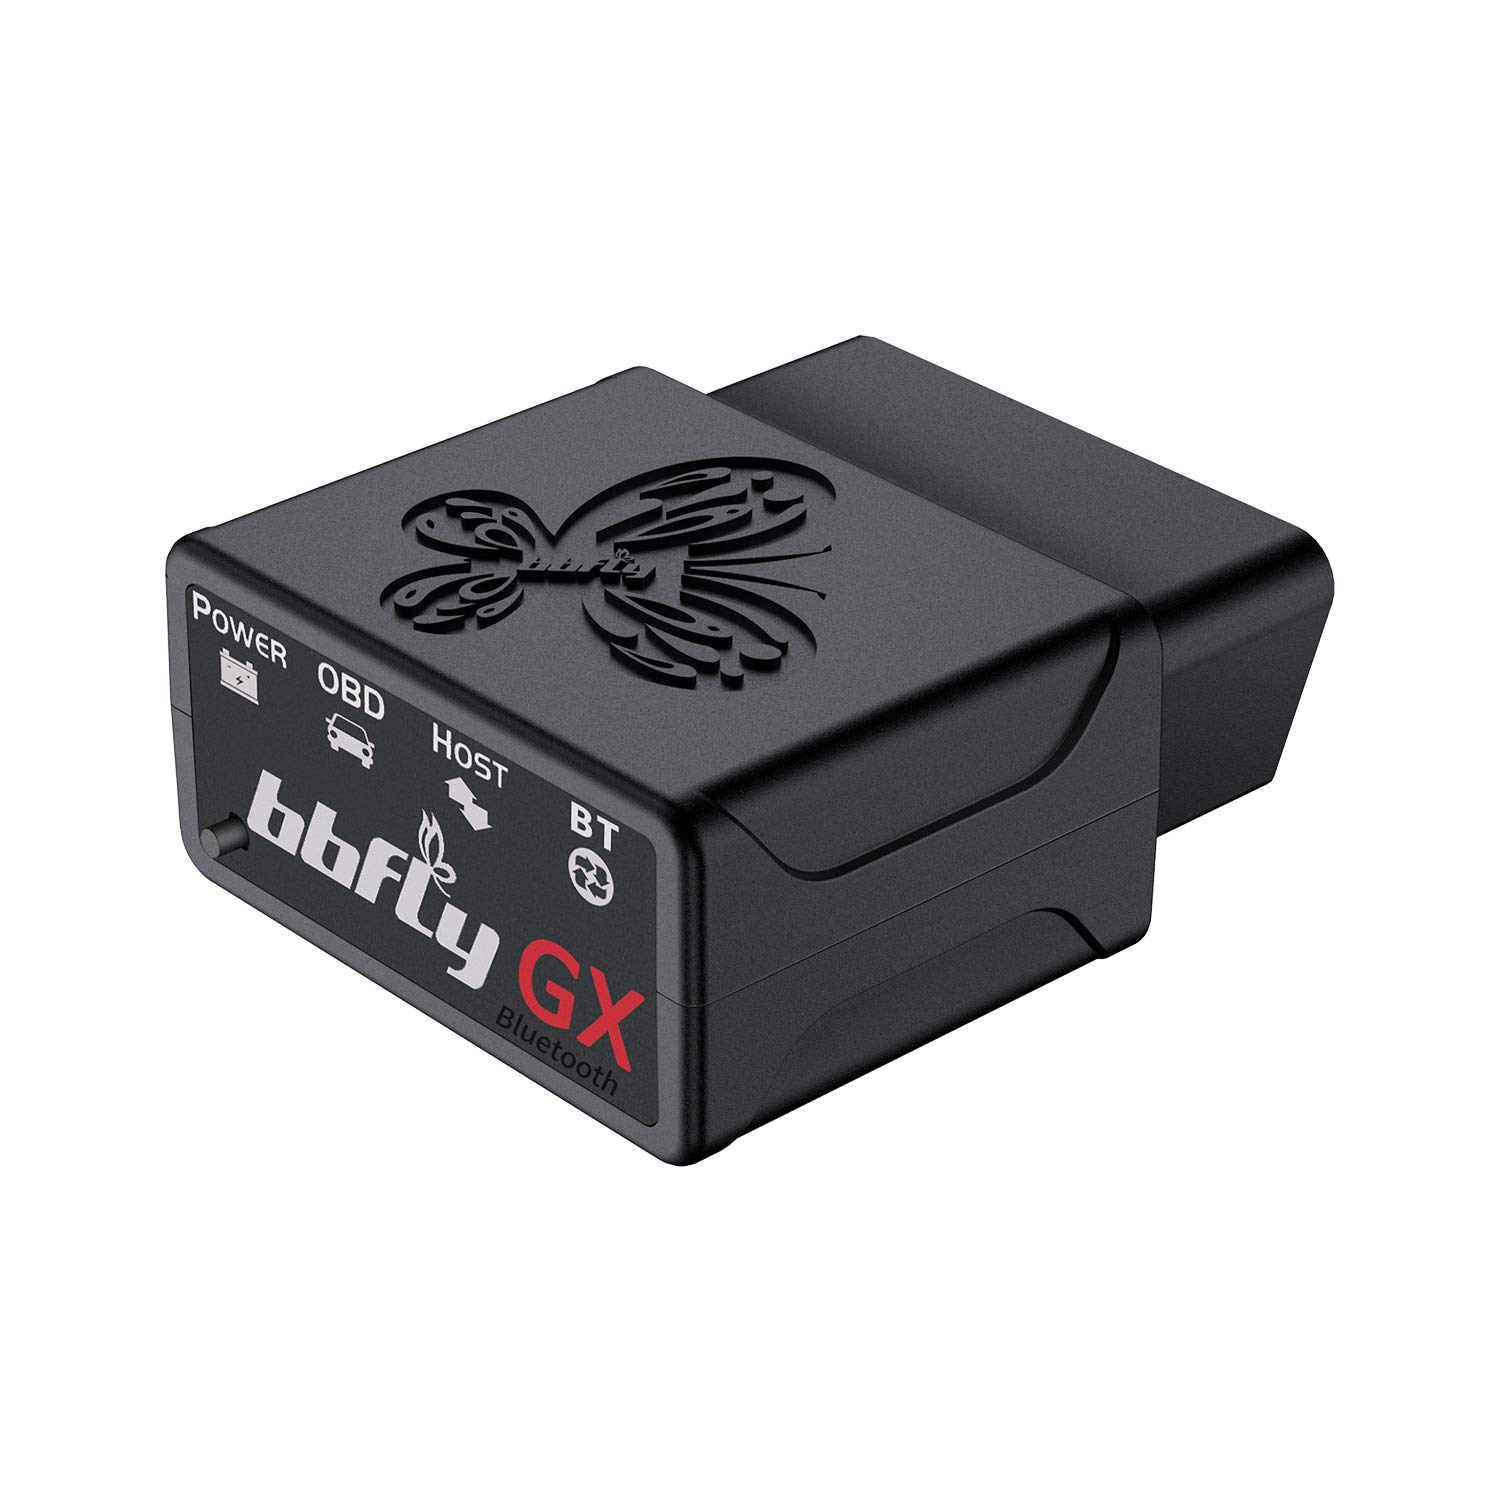 bbfly GX Bluetooth Pro OBDII Scan Tool, FORScans OBD2 Adapter Reader for Windows Android Devices von bbfly